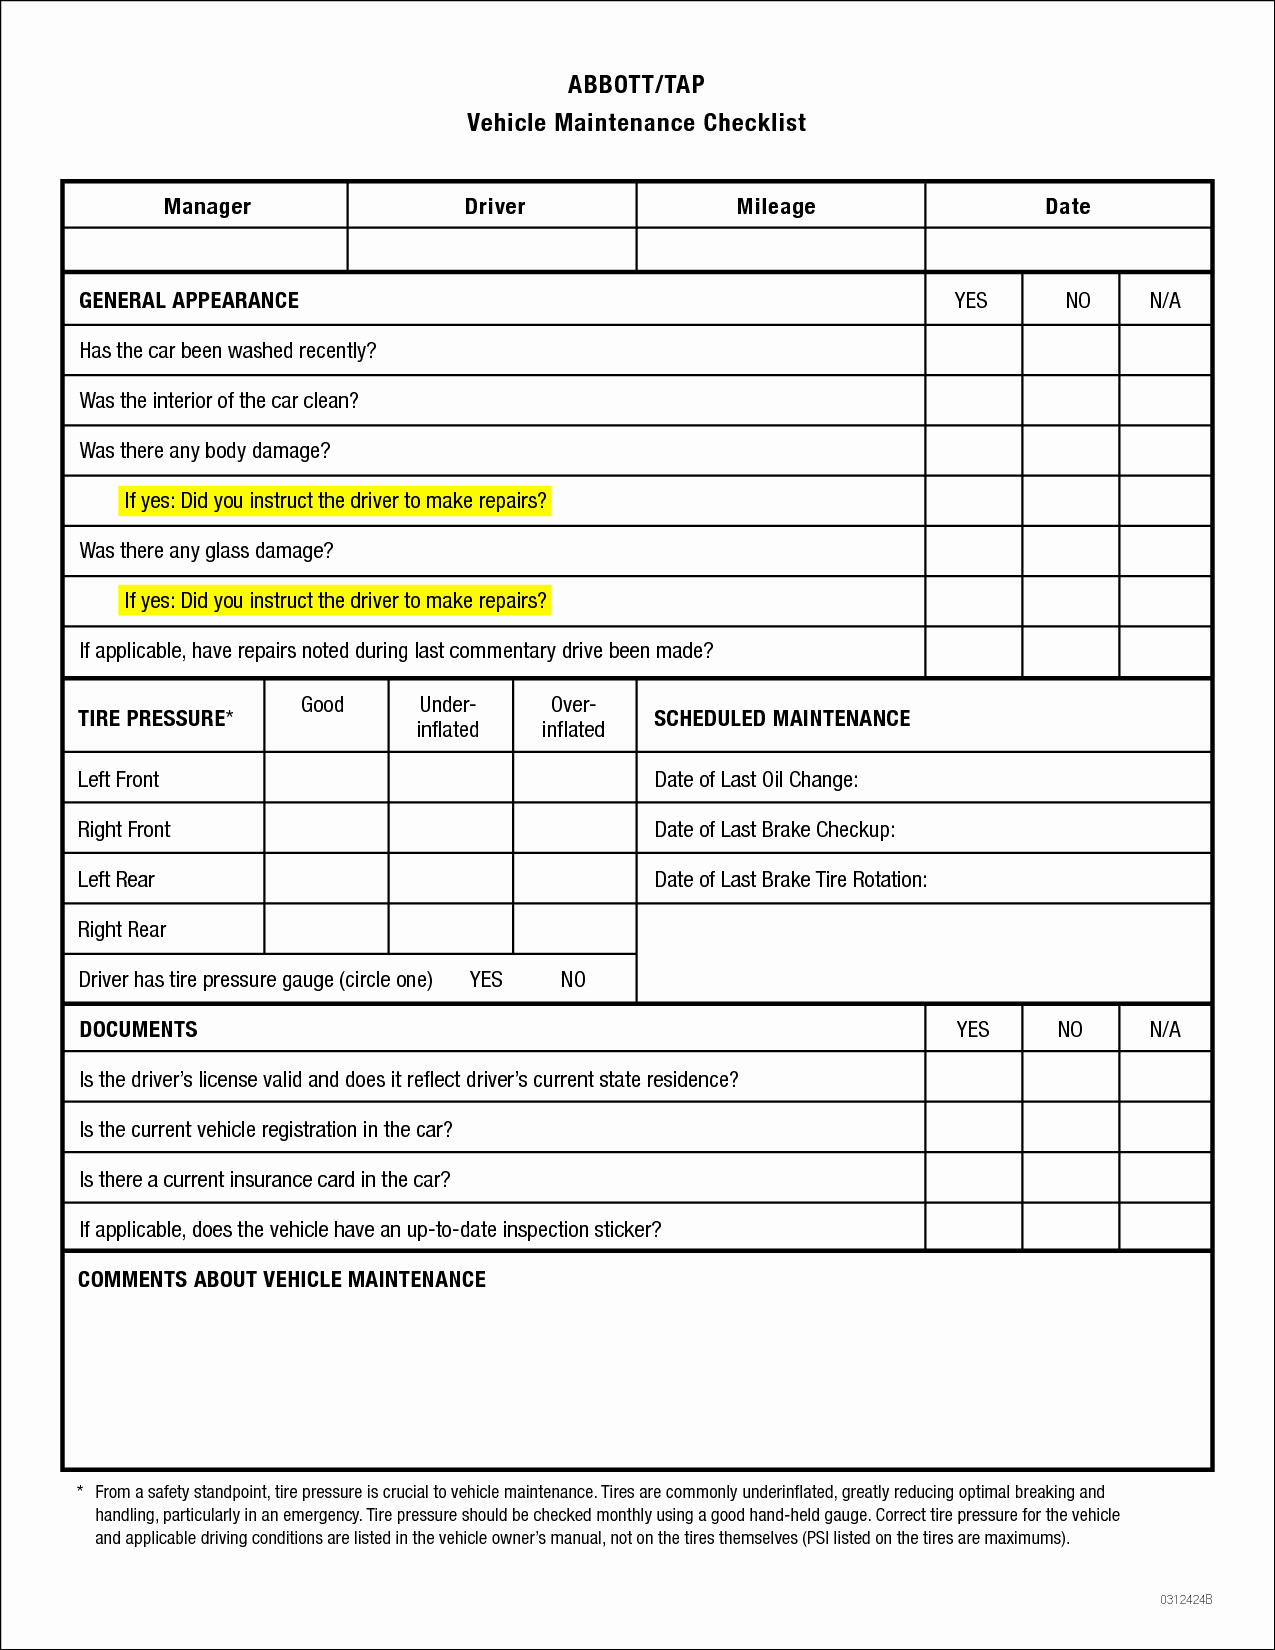 Auto Repair Checklist Template Awesome Vehicle Maintenance Checklist Template Want A Smart Way to